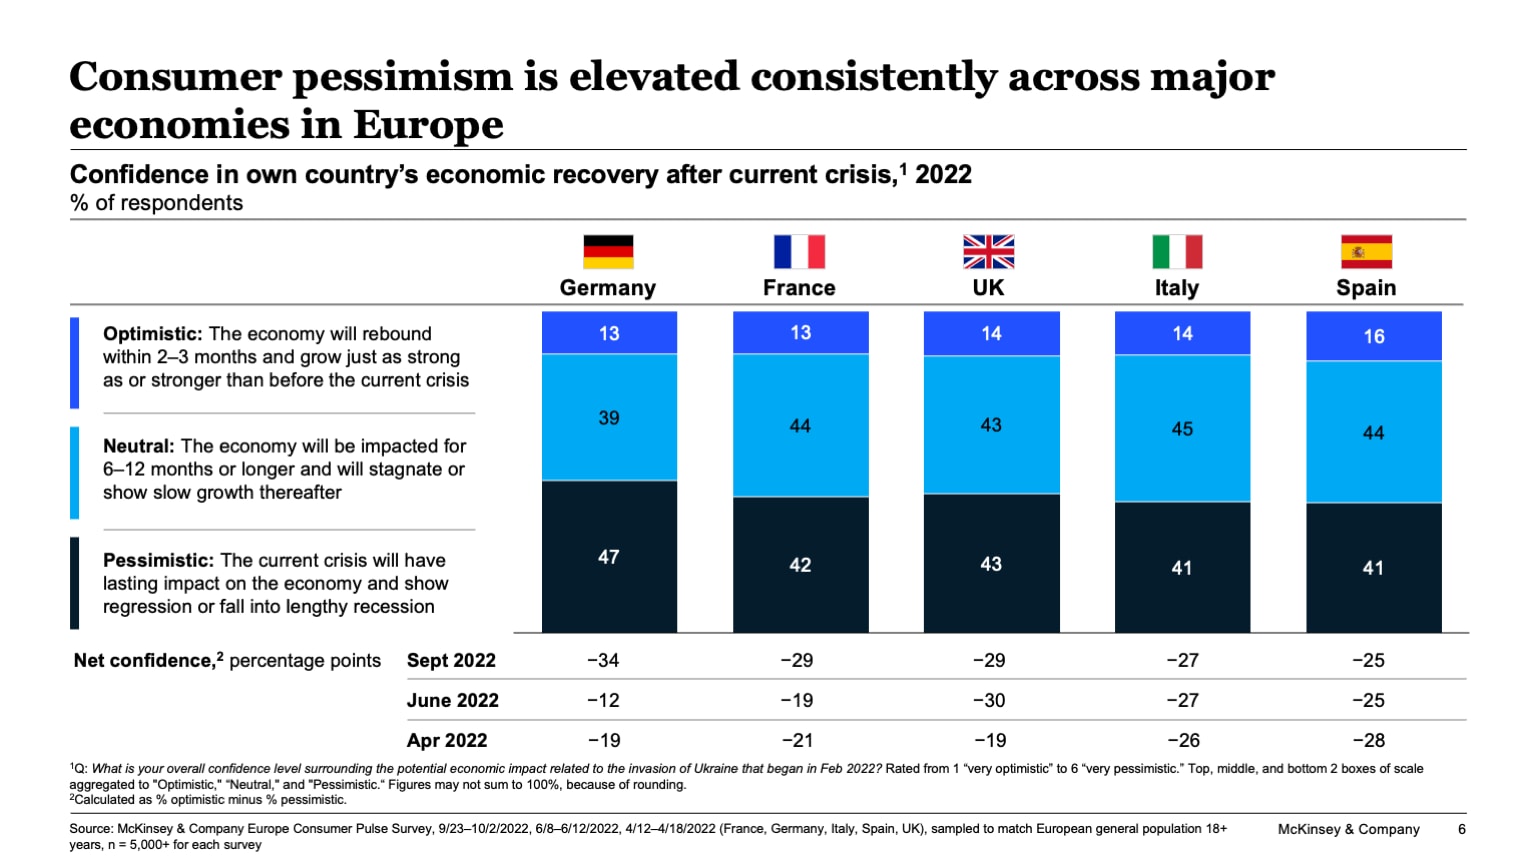 Consumer pessimism is elevated consistently across major economies in Europe